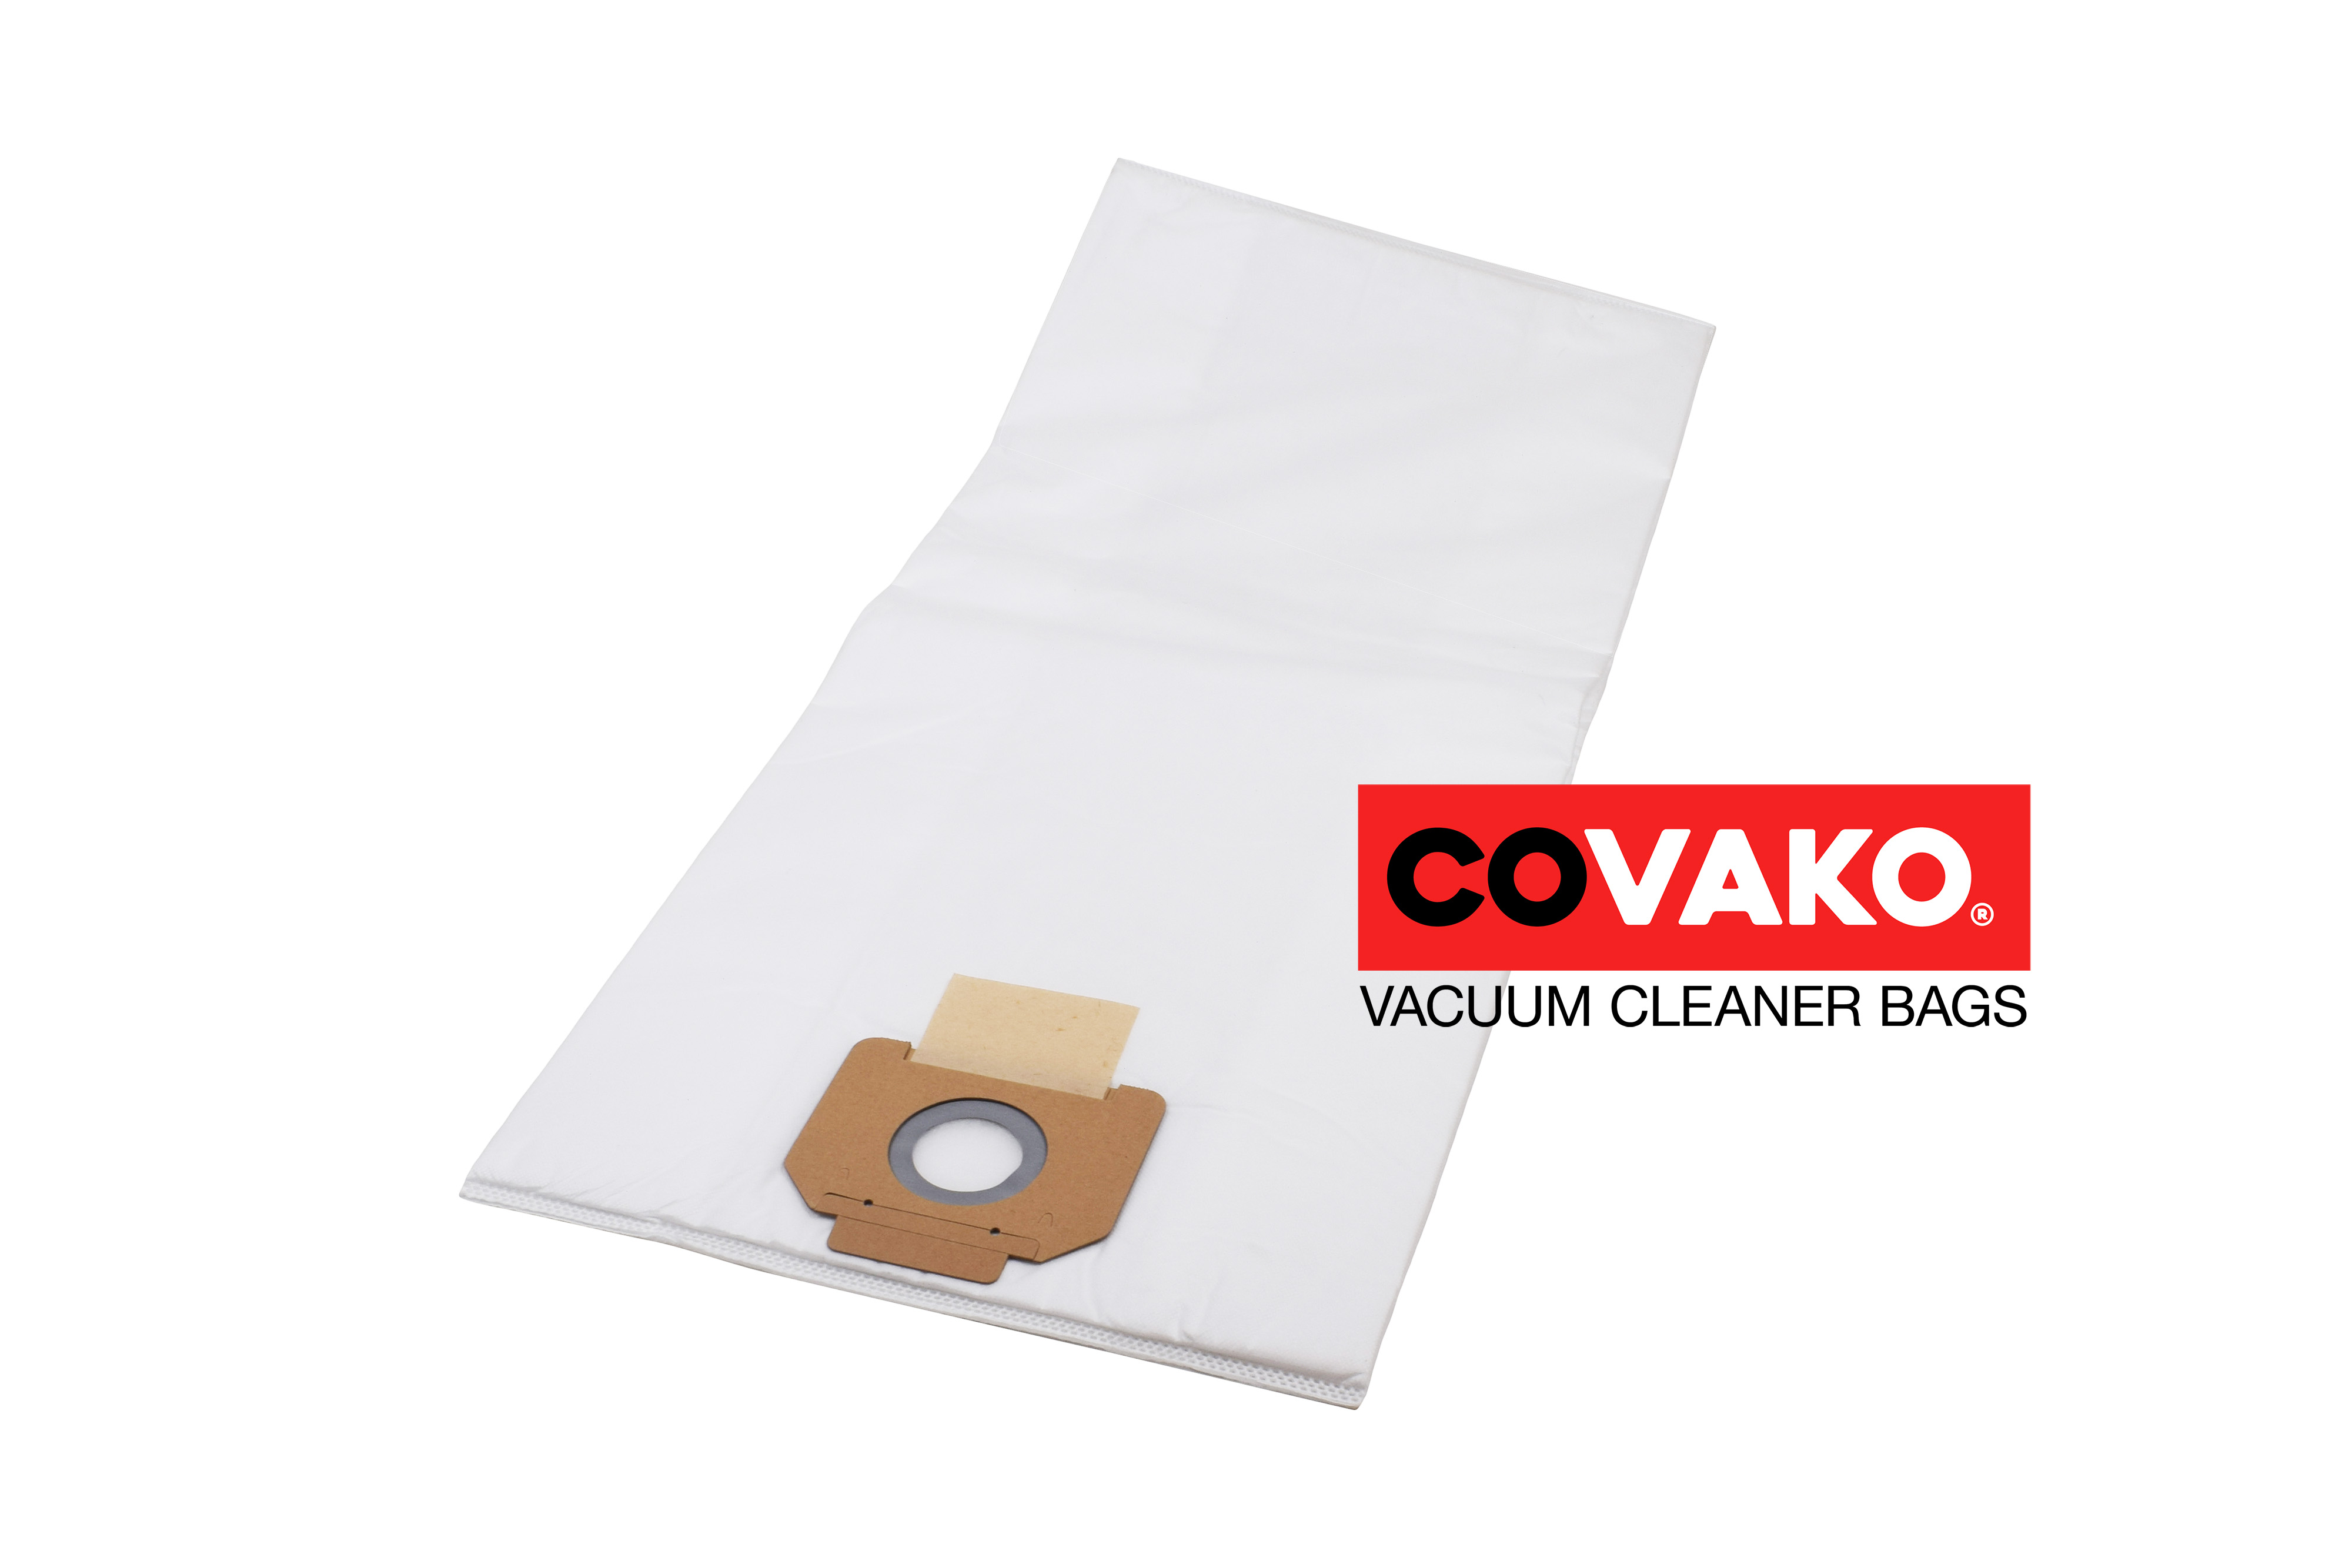 Fakir IC 414 RT / Synthesis - Fakir vacuum cleaner bags